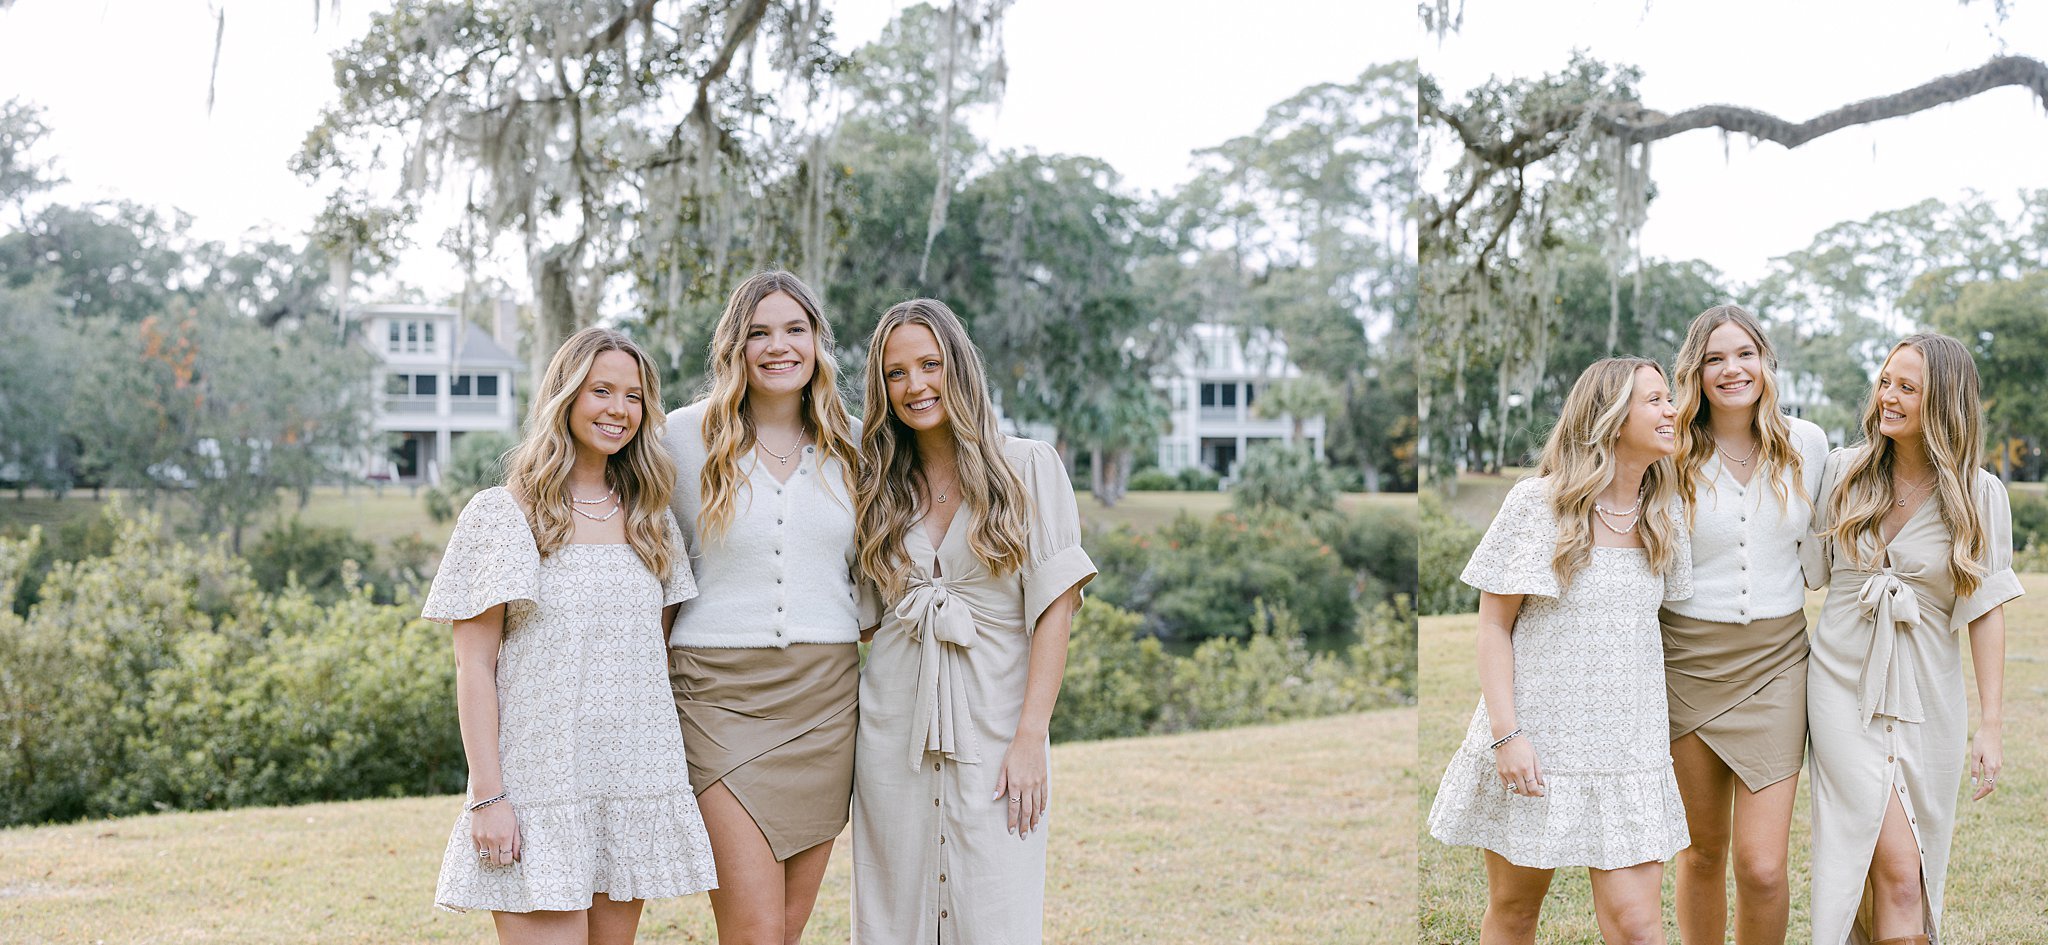 Katherine_Ives_Photography_Timmerman_Family_palmetto_bluff_35977.JPG